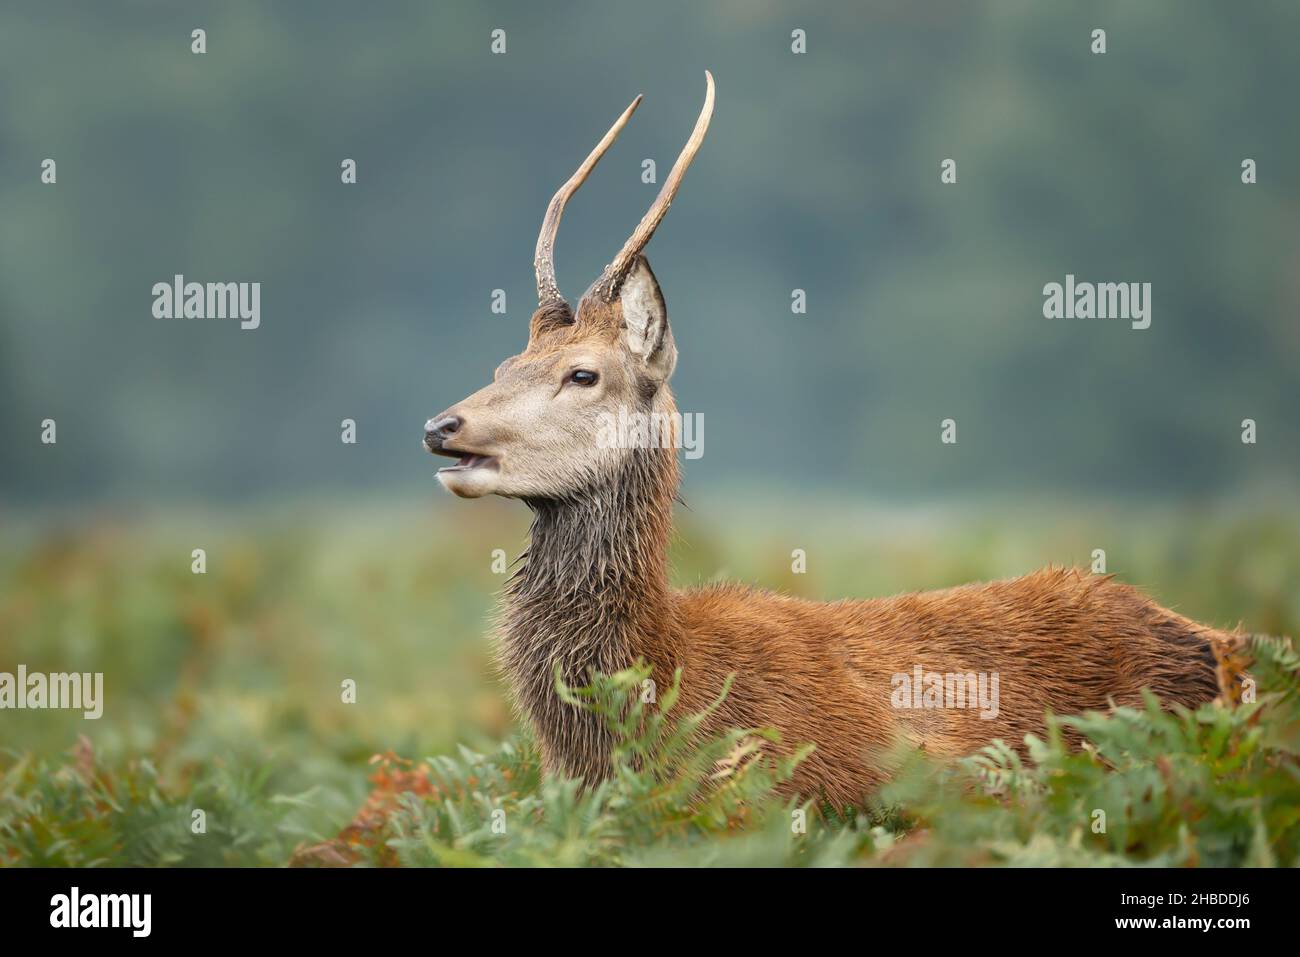 Close-up of a young red deer stag standing in bracken on a misty autumn morning, UK. Stock Photo